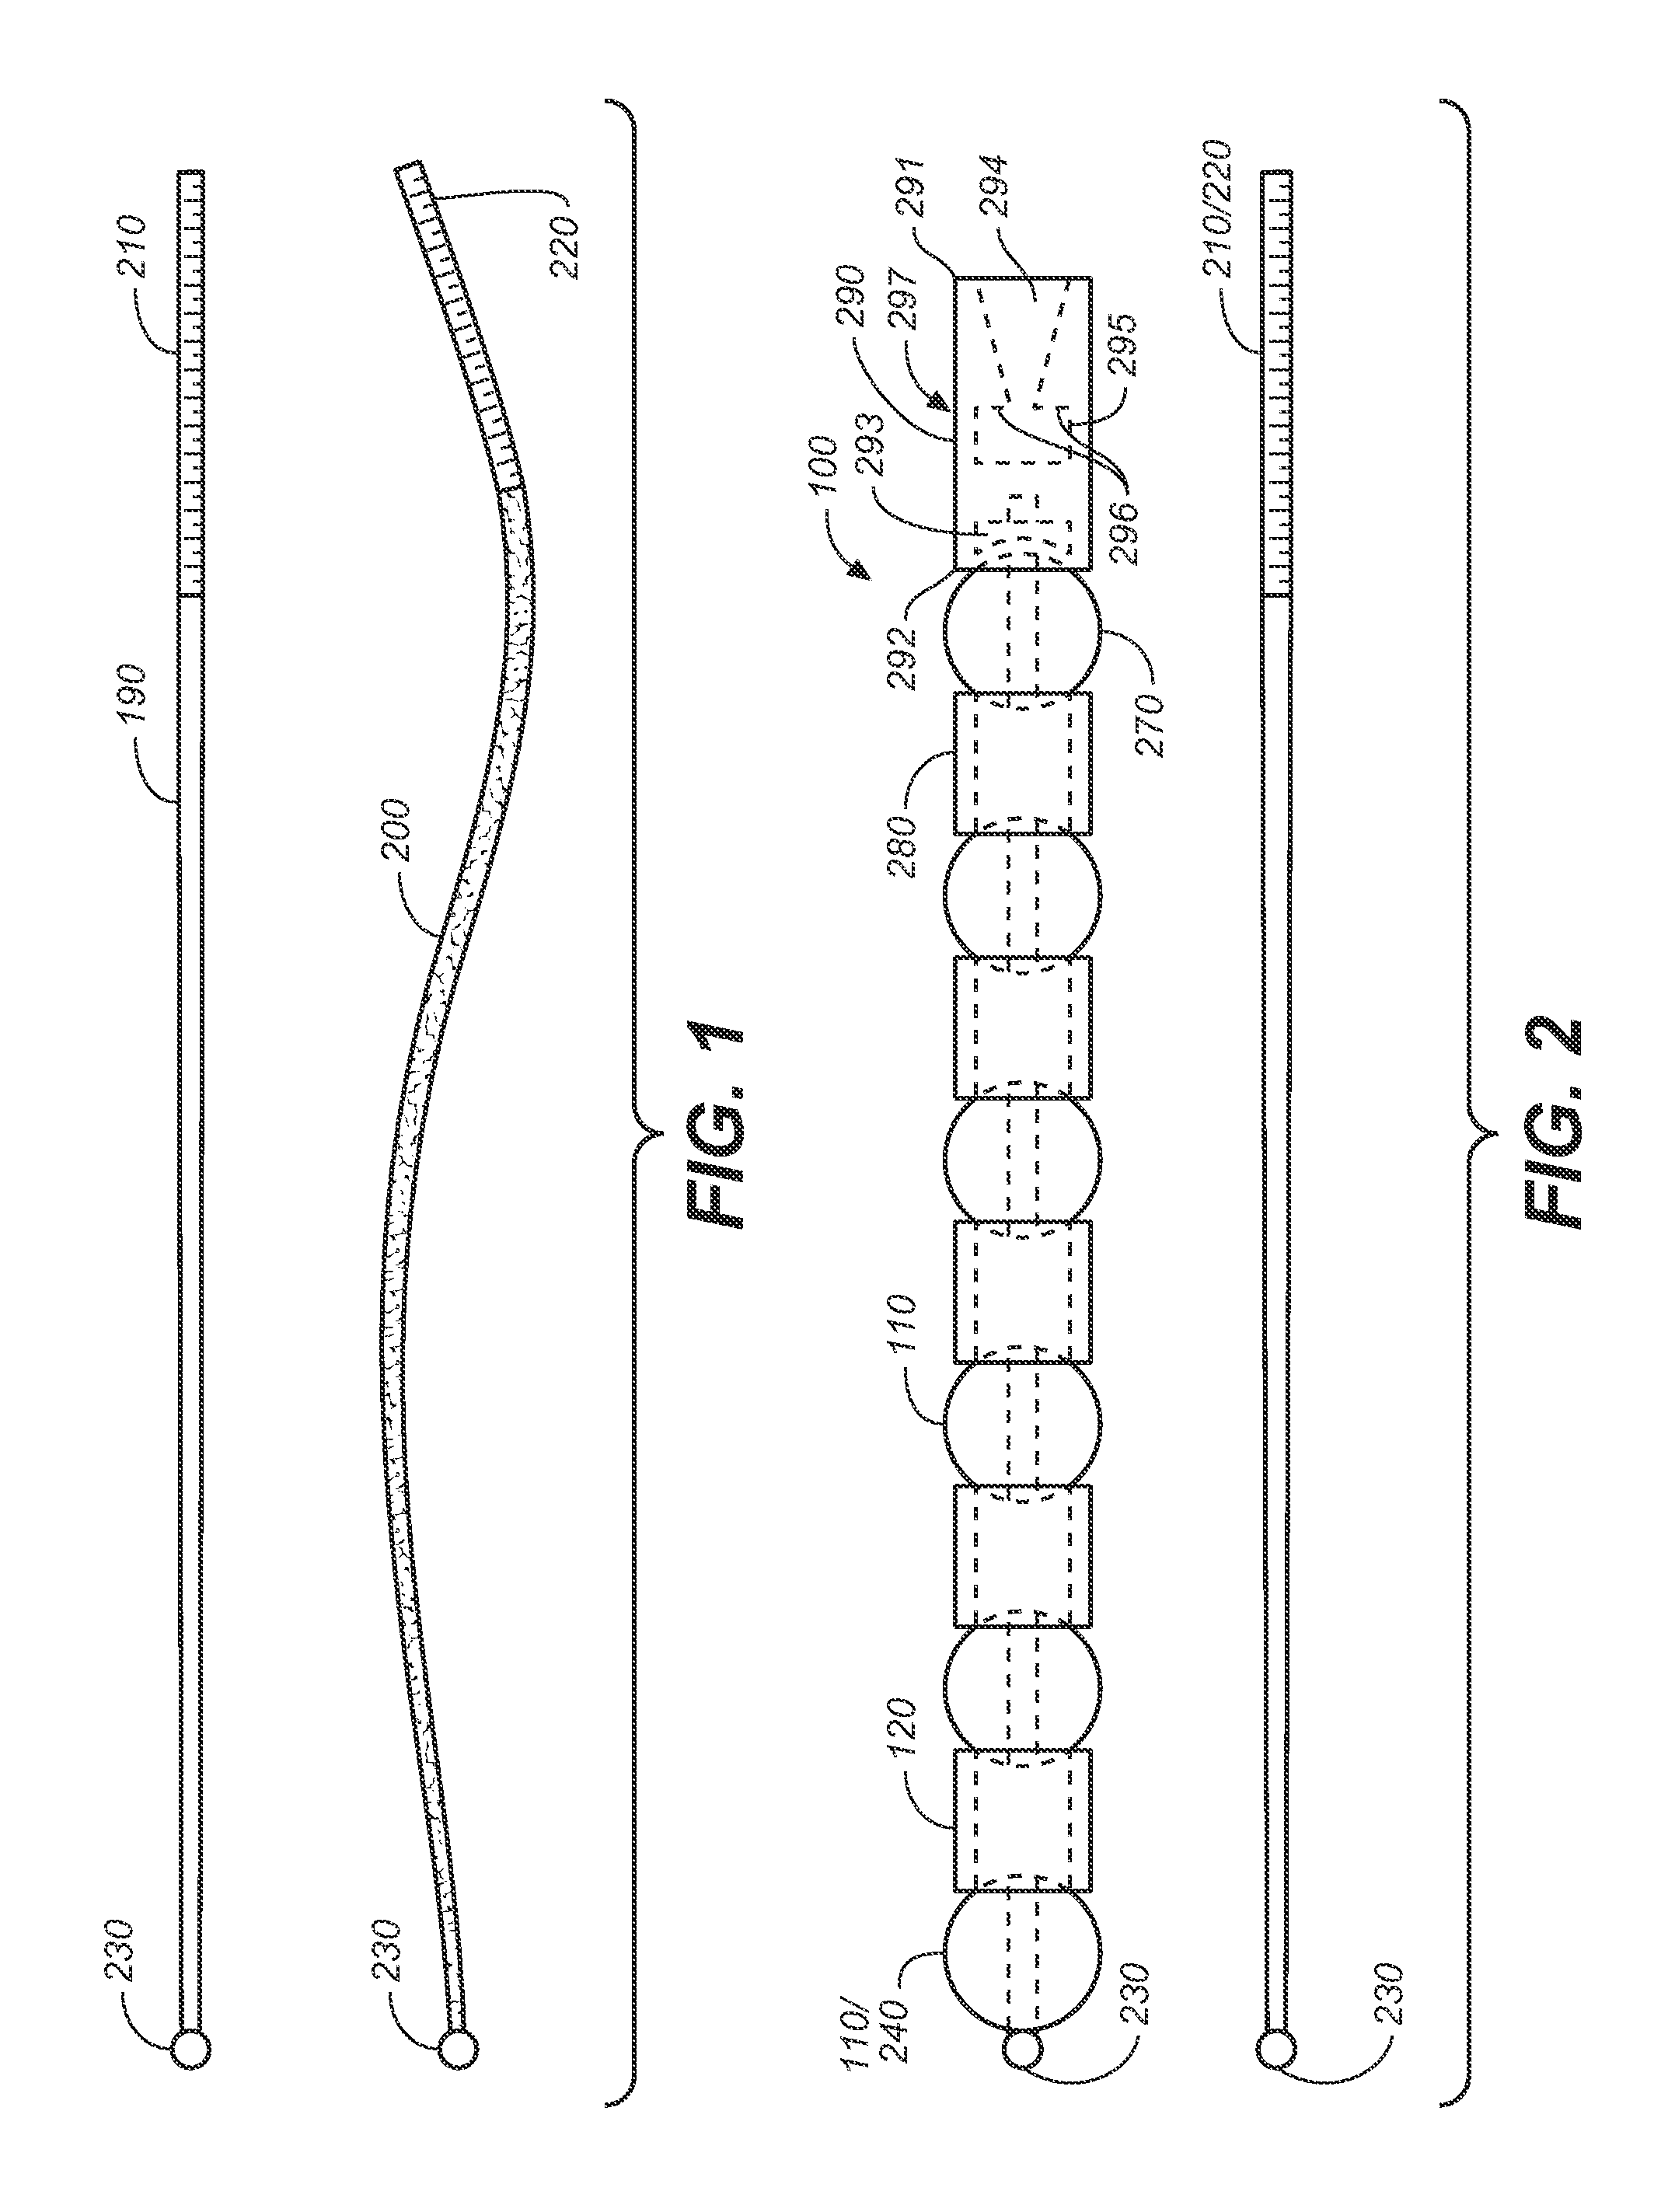 Multi-articulated fracture fixation device with adjustable modulus of rigidity